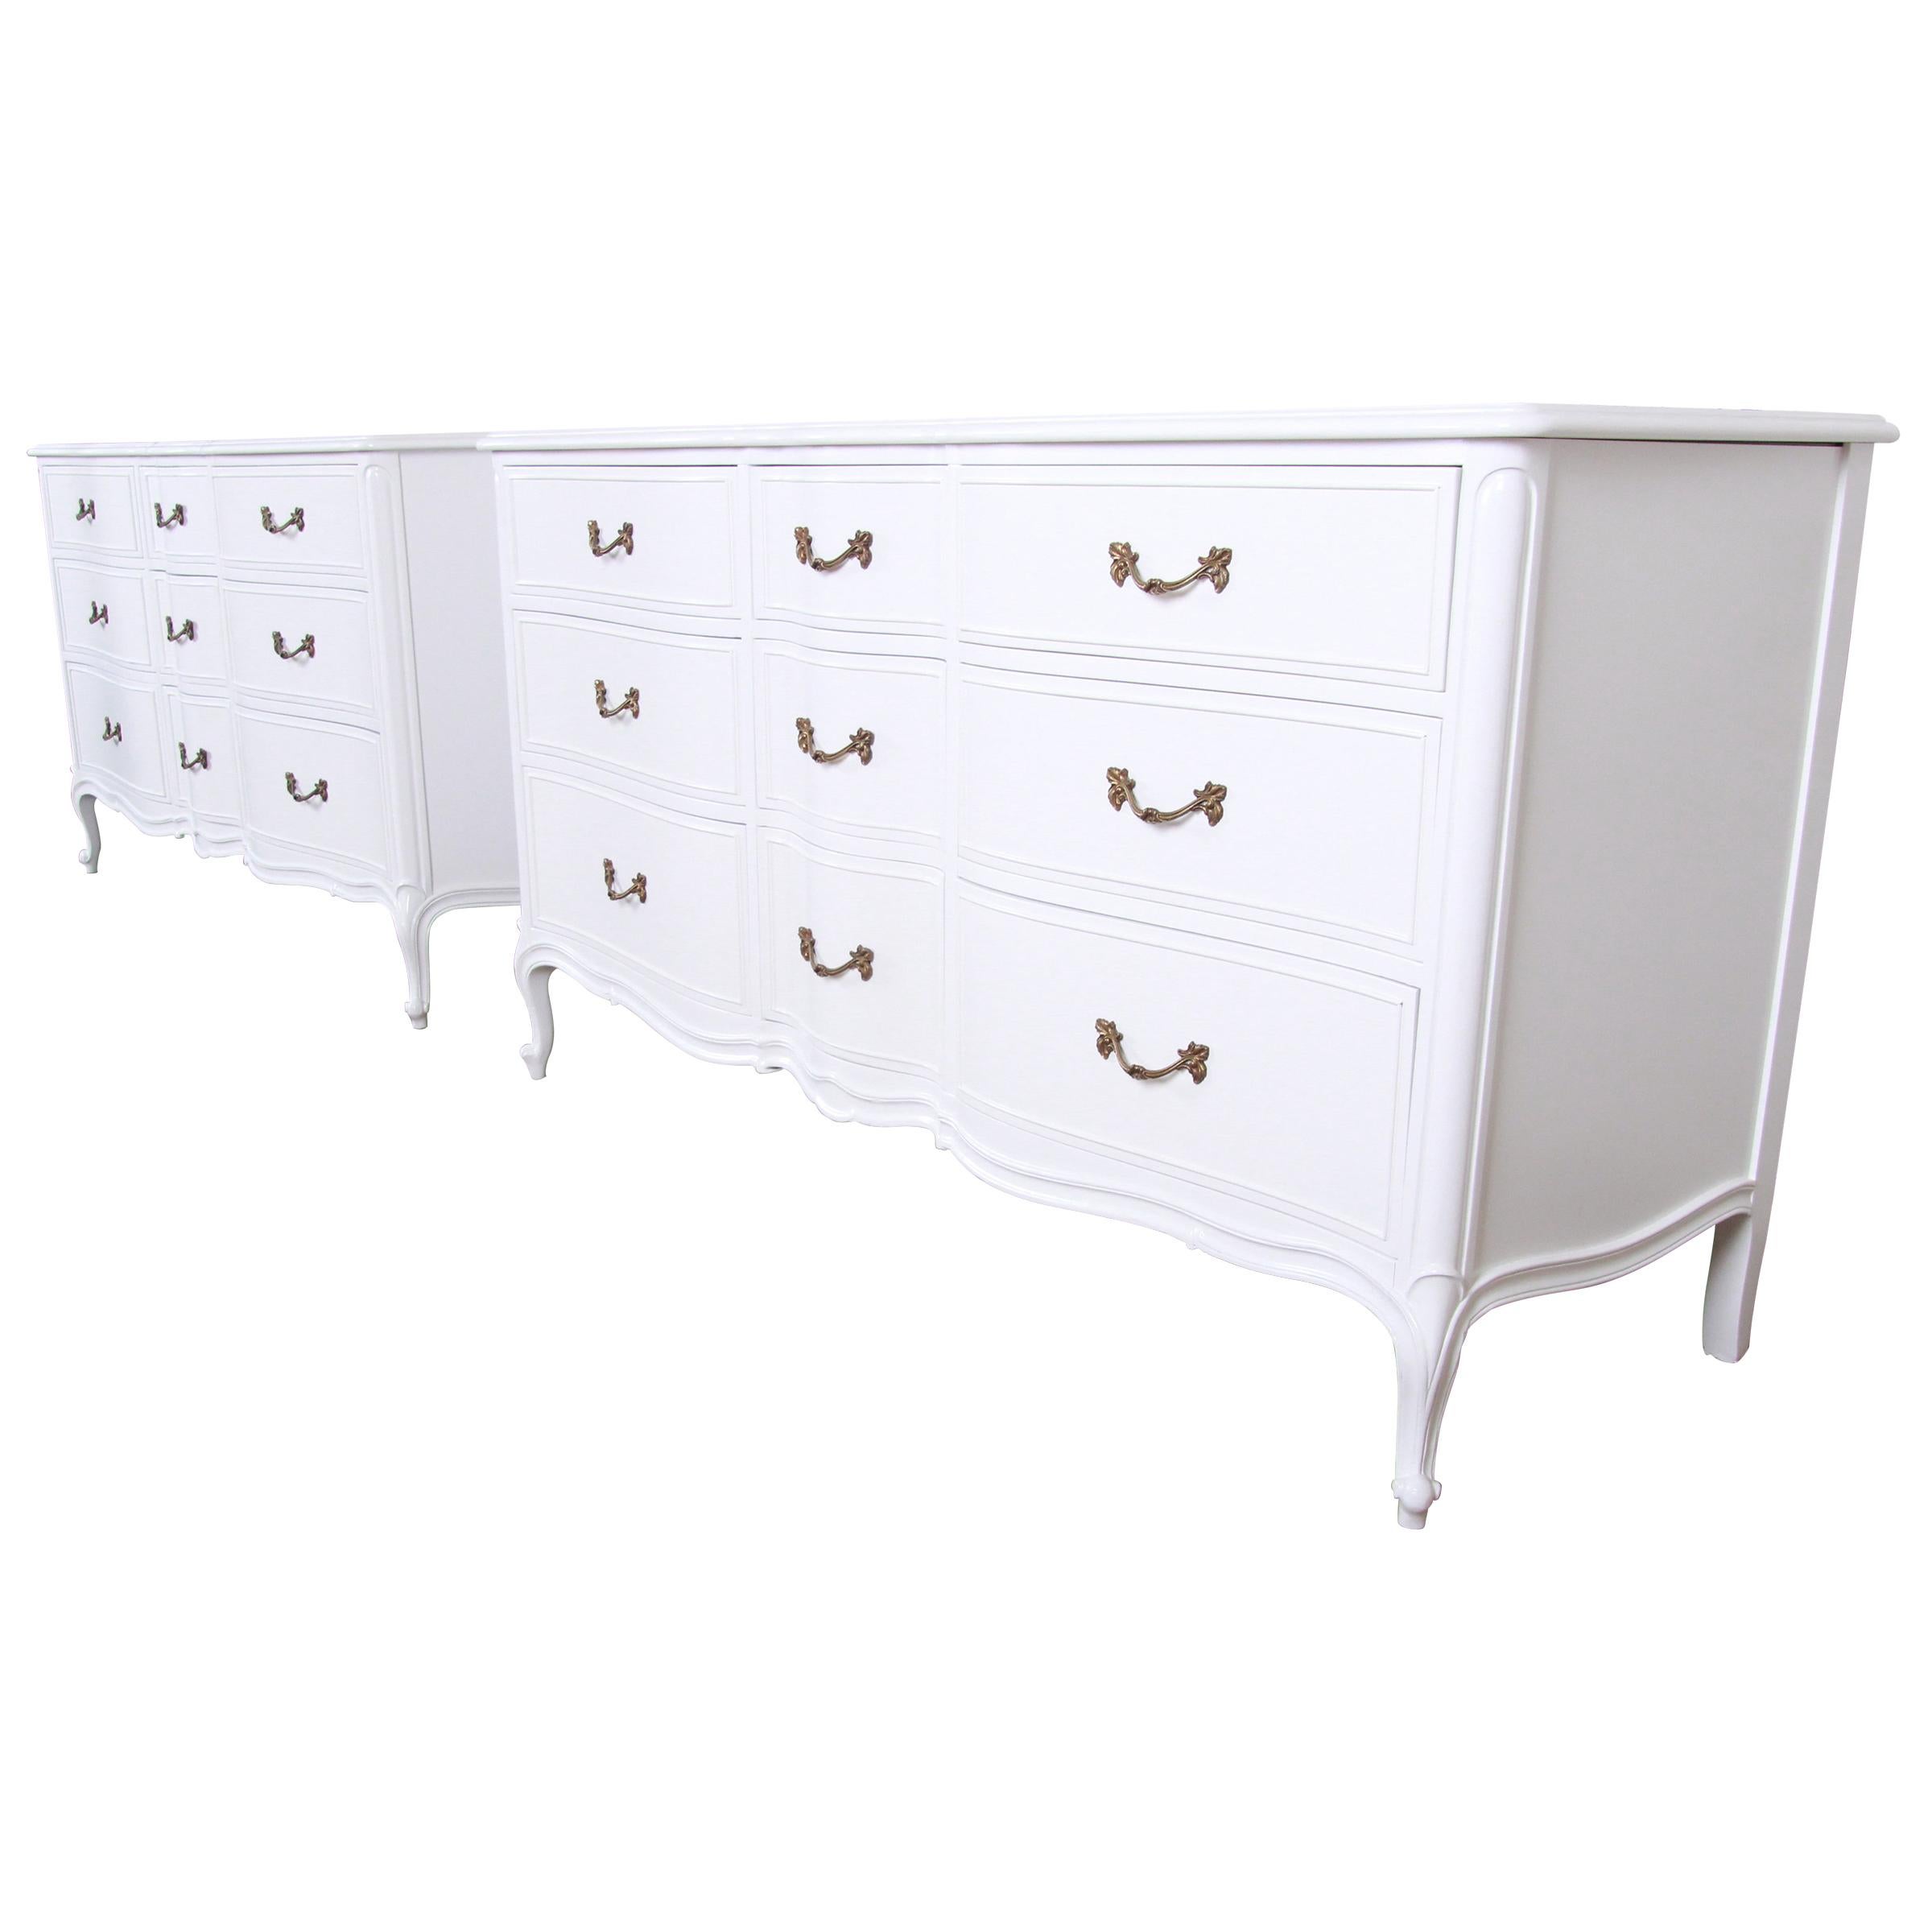 French Provincial Louis XV White Lacquered Triple Dressers by Drexel, Refinished